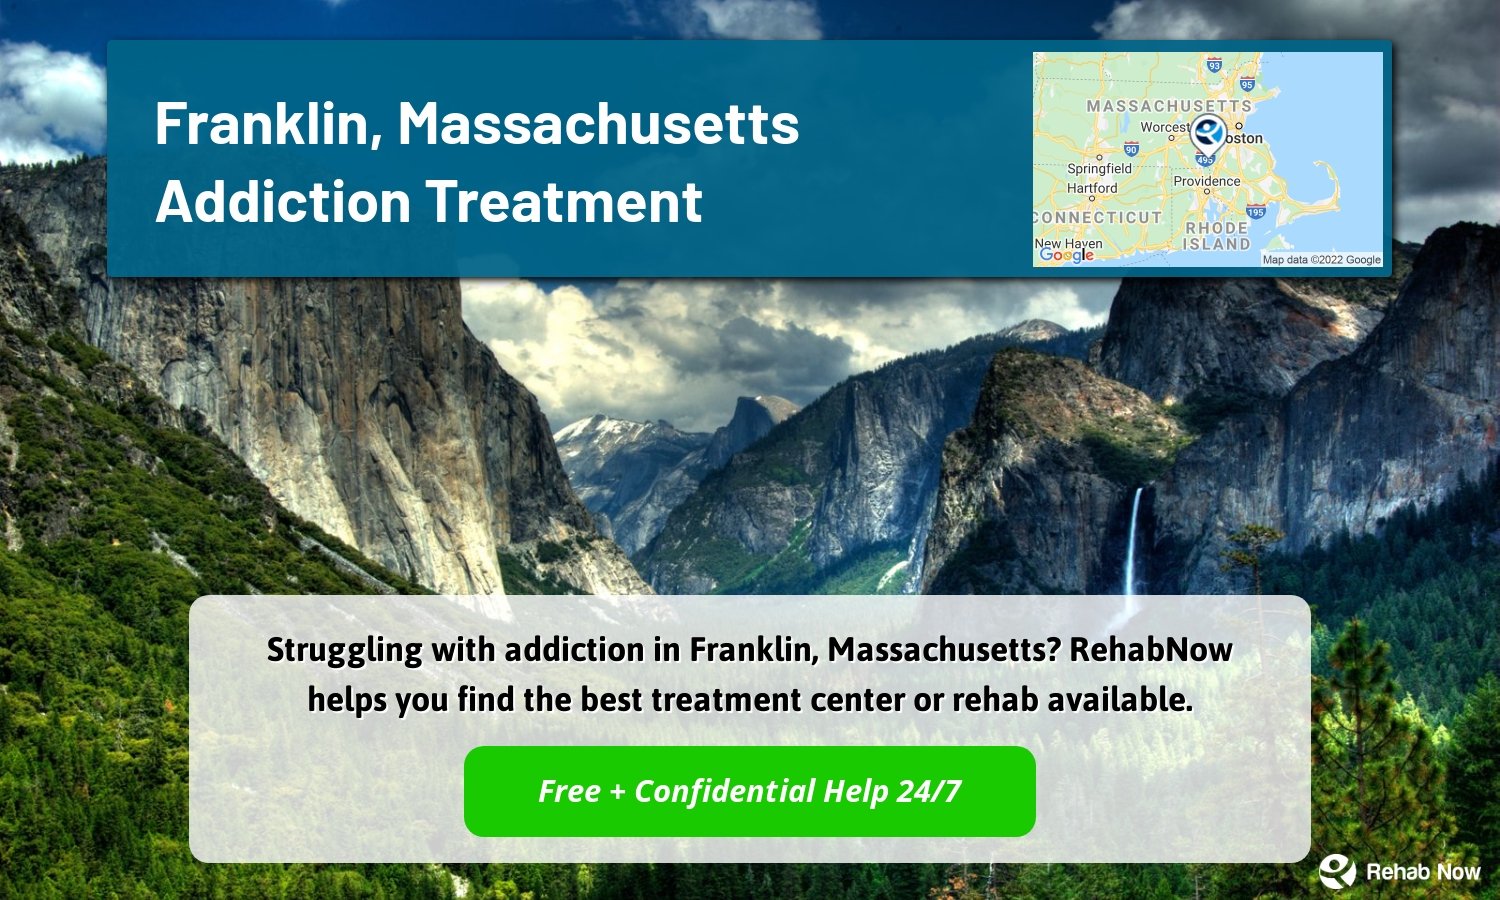 Struggling with addiction in Franklin, Massachusetts? RehabNow helps you find the best treatment center or rehab available.